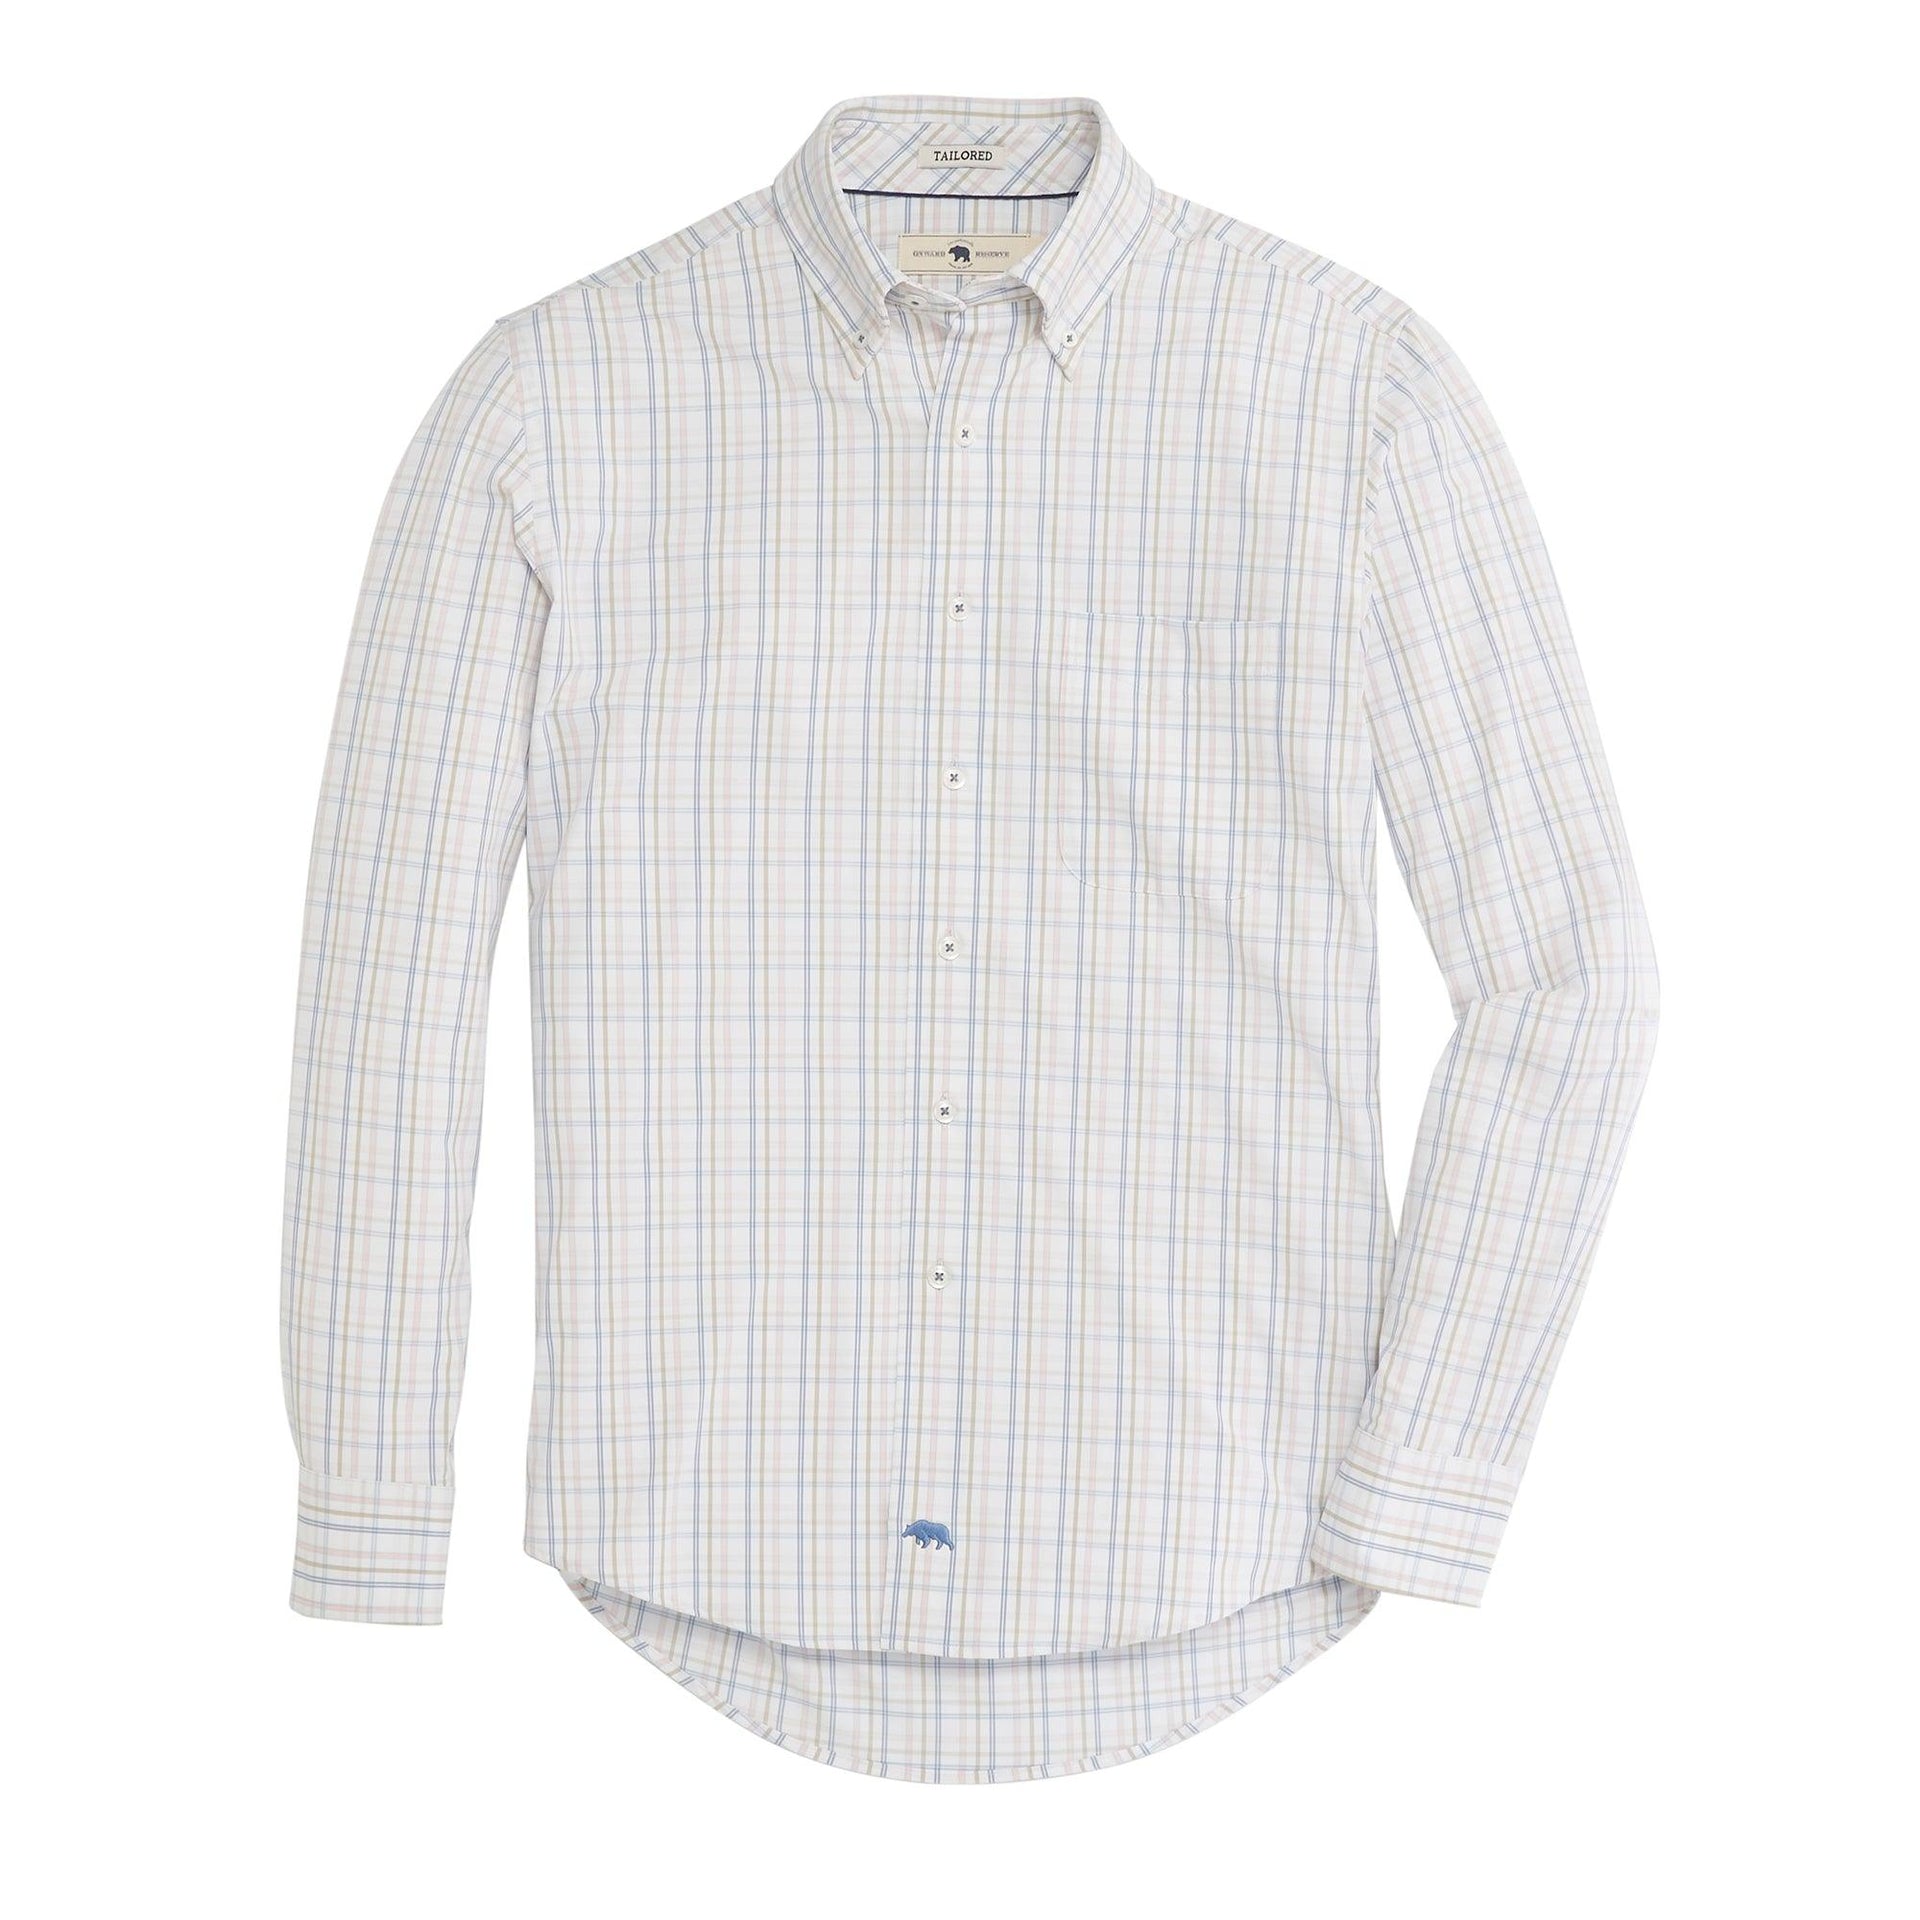 Paxton Tailored Fit Performance Twill Button Down